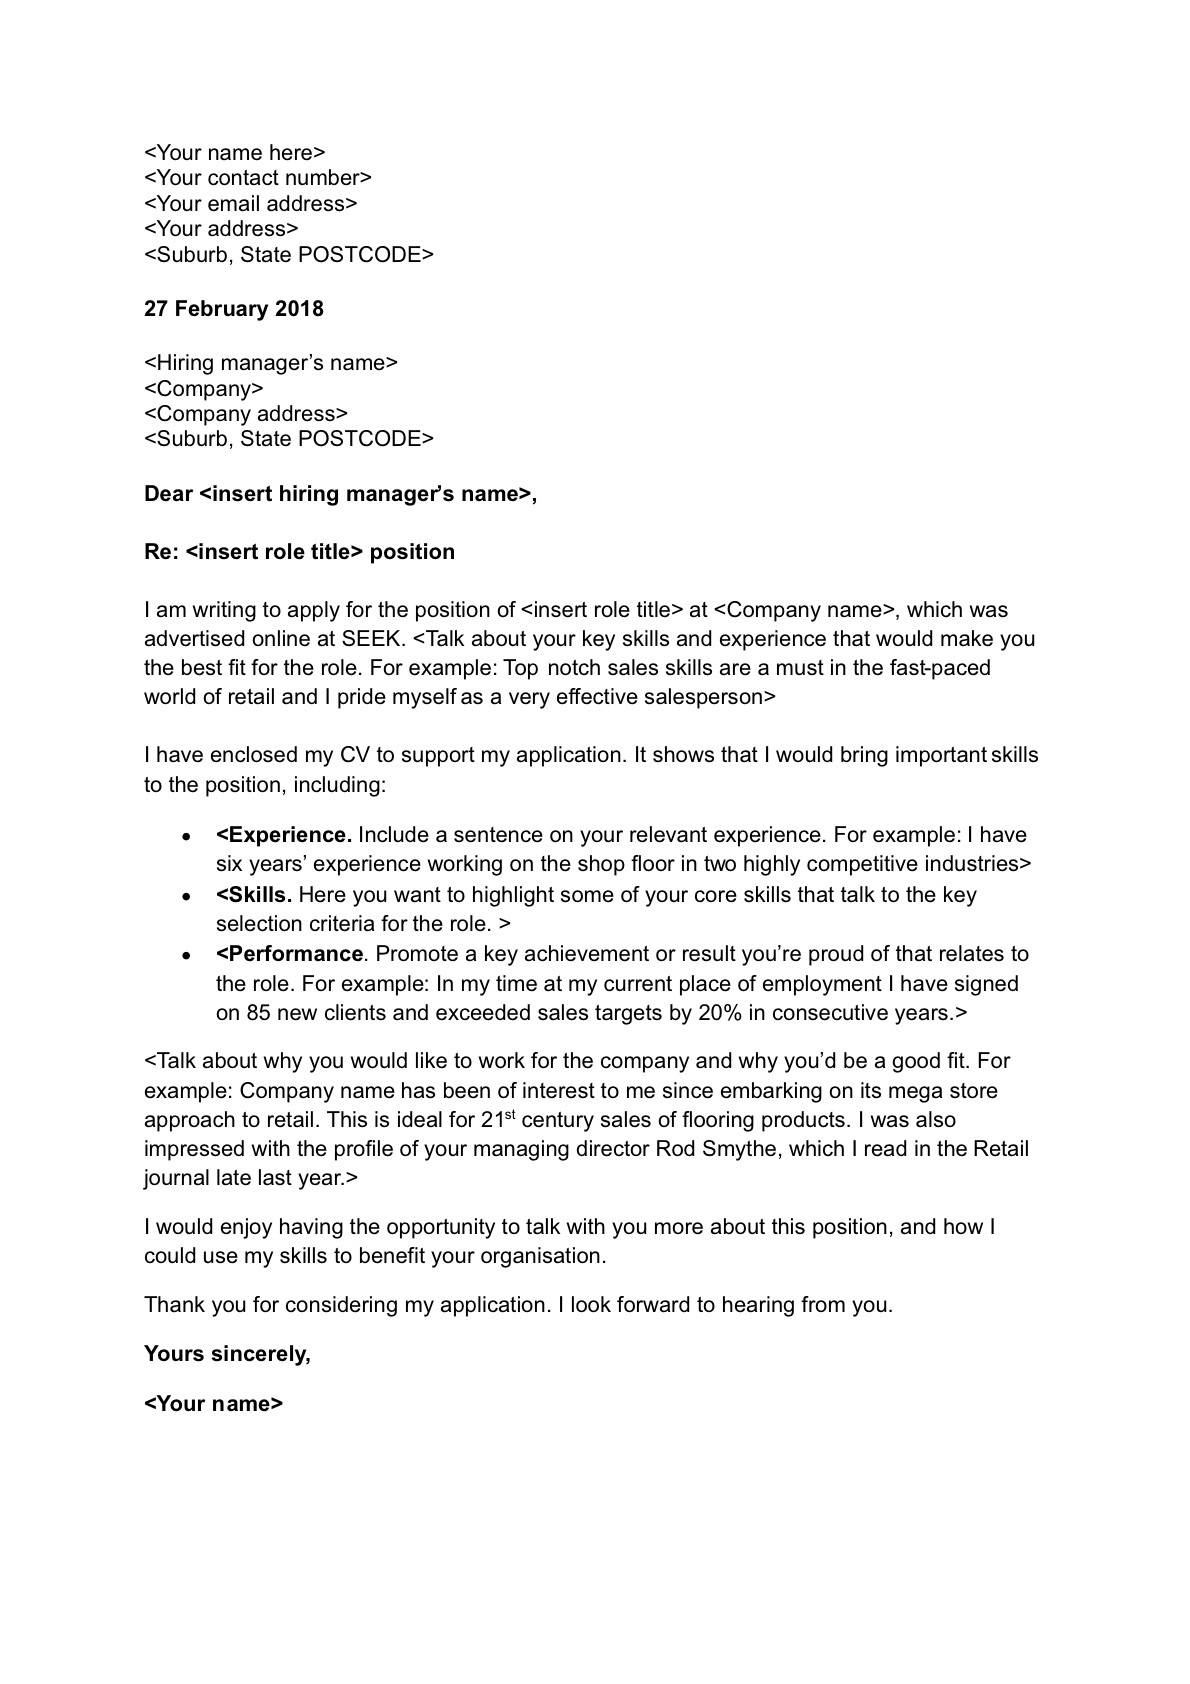 It Cover Letter Sample from seekconz.corewebdna.net.au